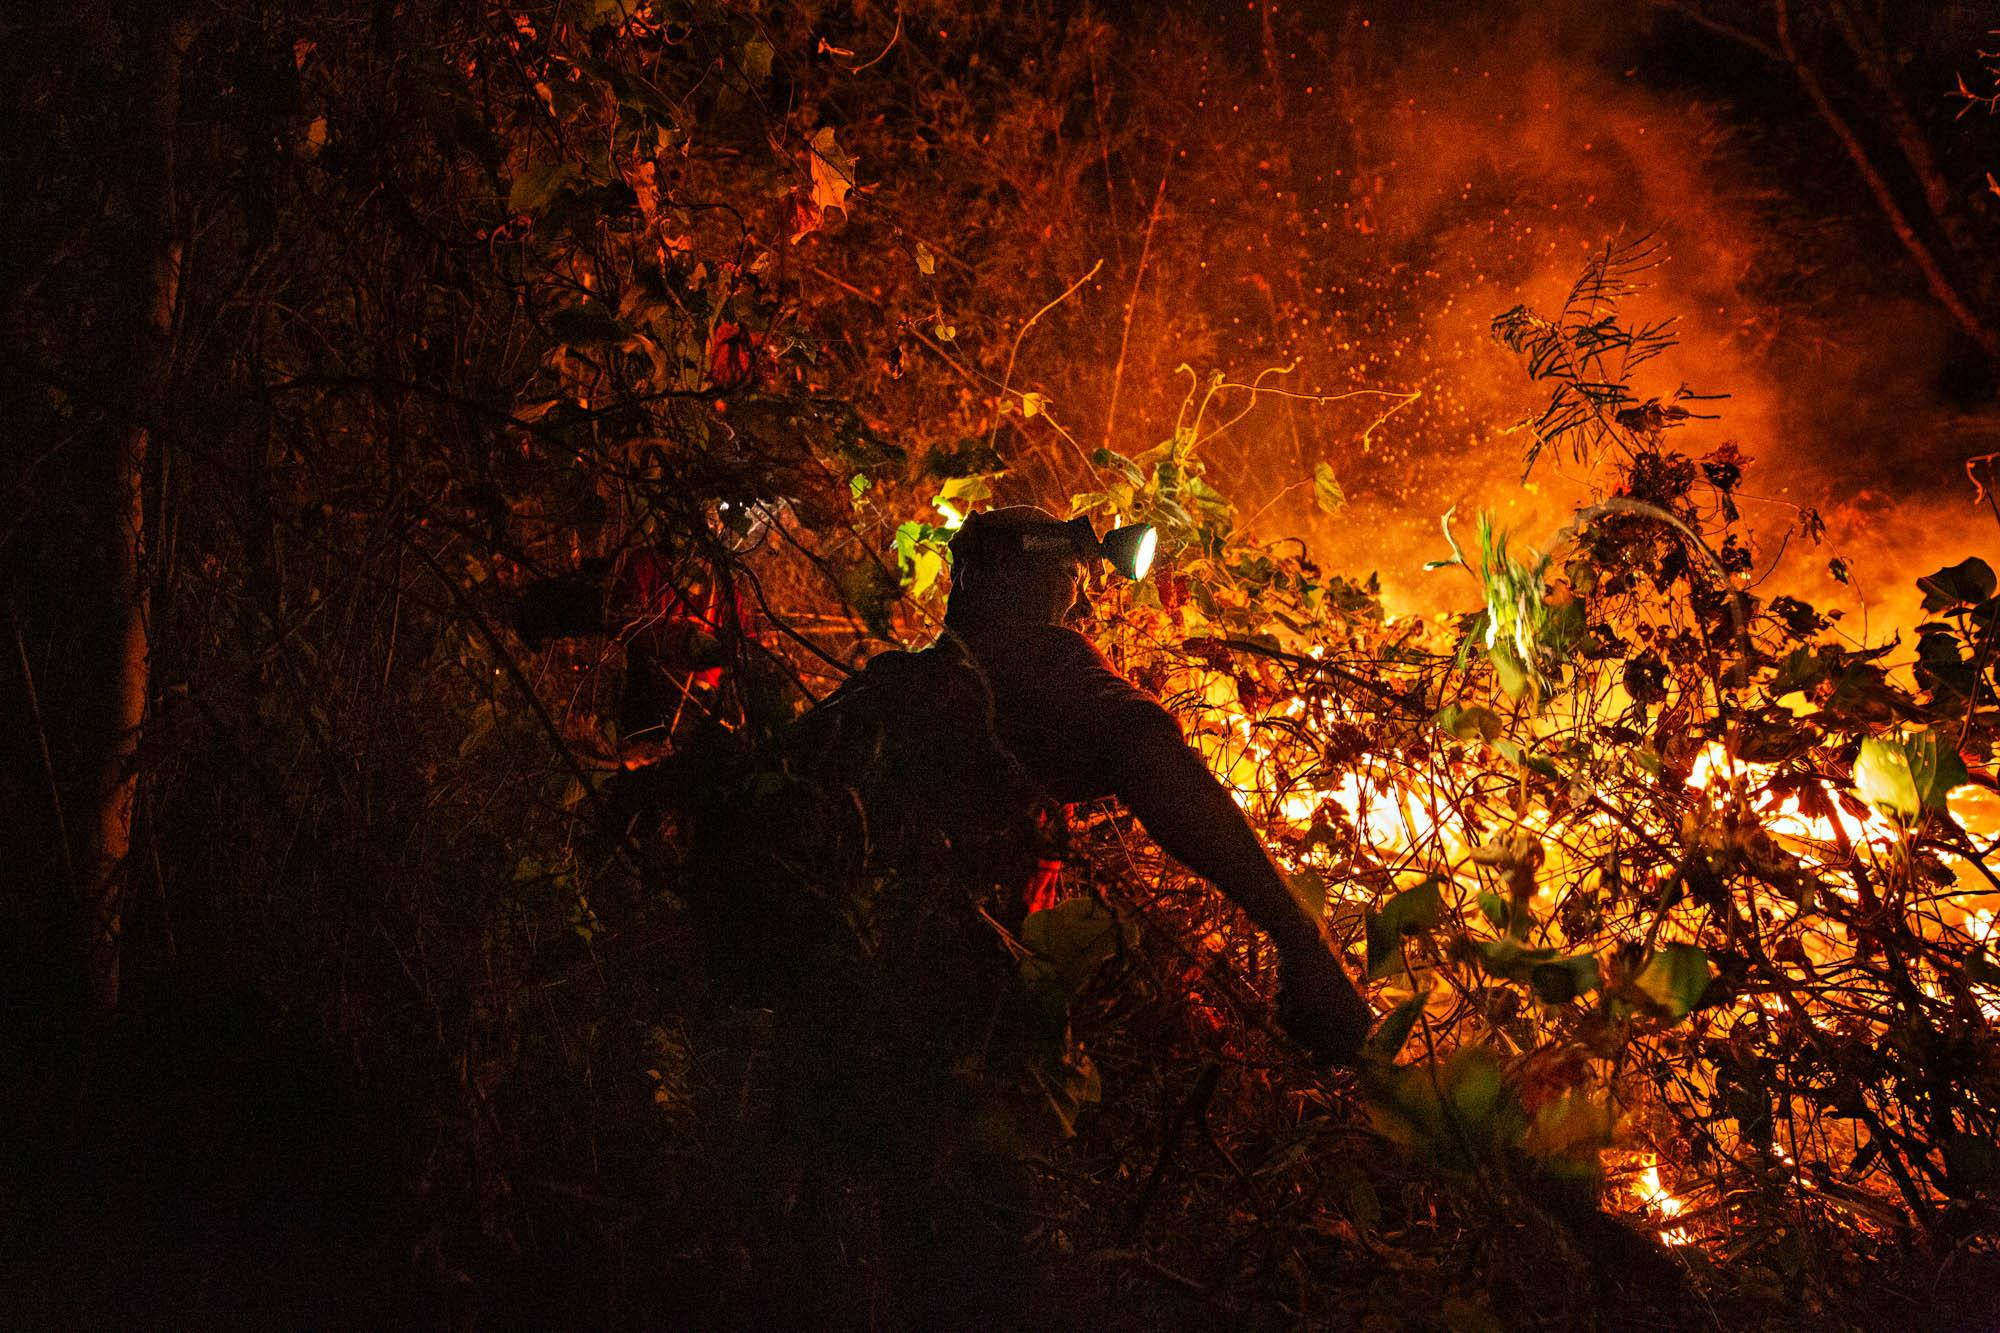 A fire fighter from Doi Mae Salong fire station works to put out a forest fire near Thai-Myanmar border, April 2019. The part-time hires worked day and night to keep the blazes in check.